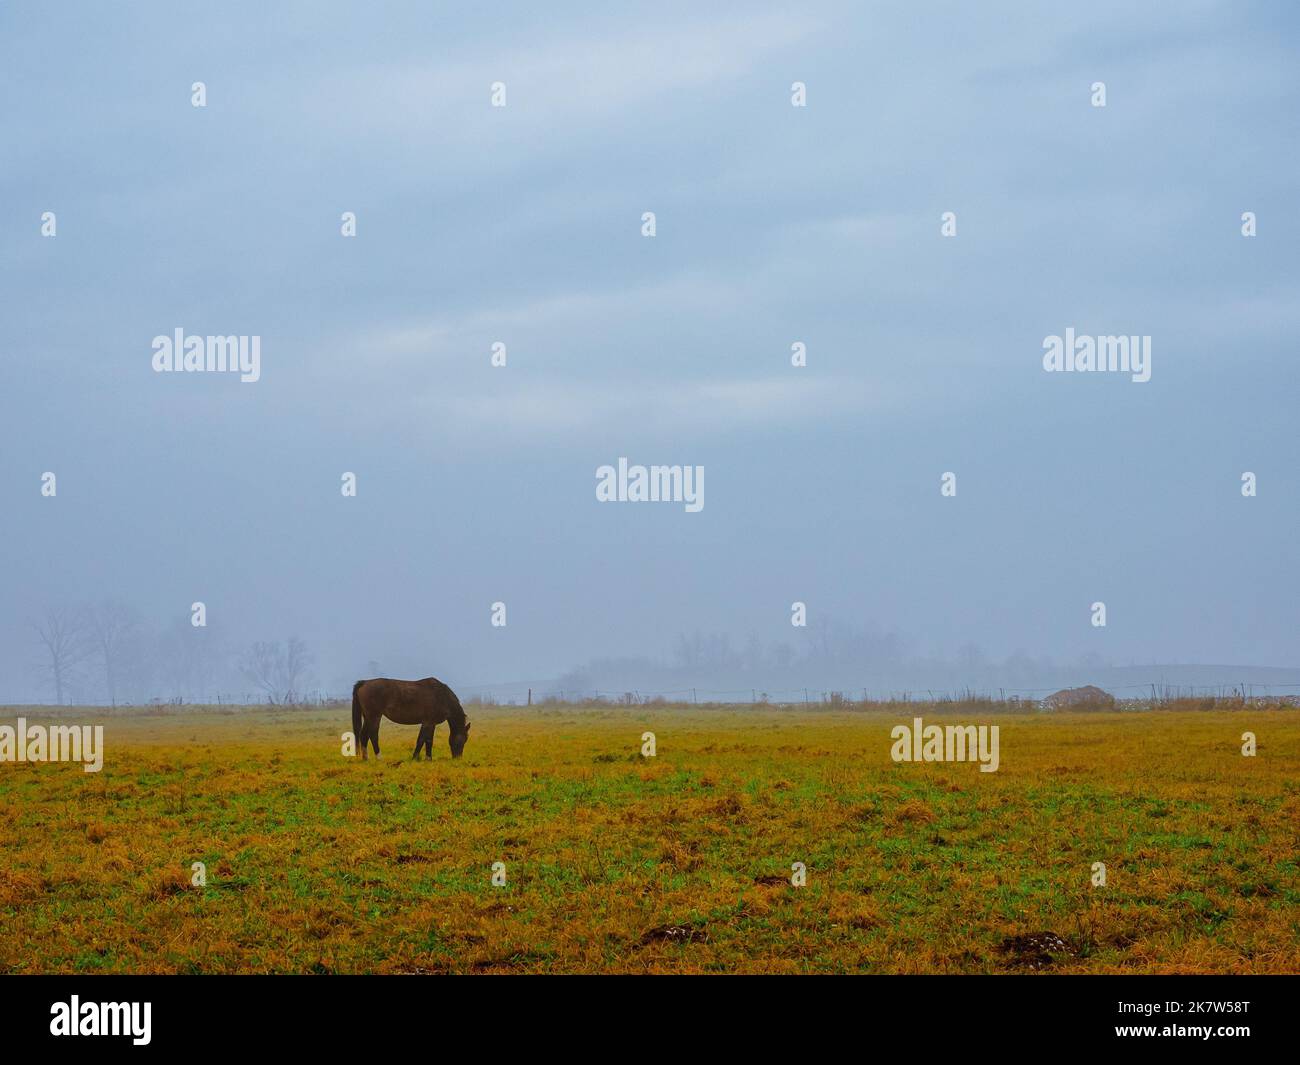 Horse Grazing On Grassy Field. Alone horse n the pasture in a countryside in a moody cloudy autumn day Stock Photo